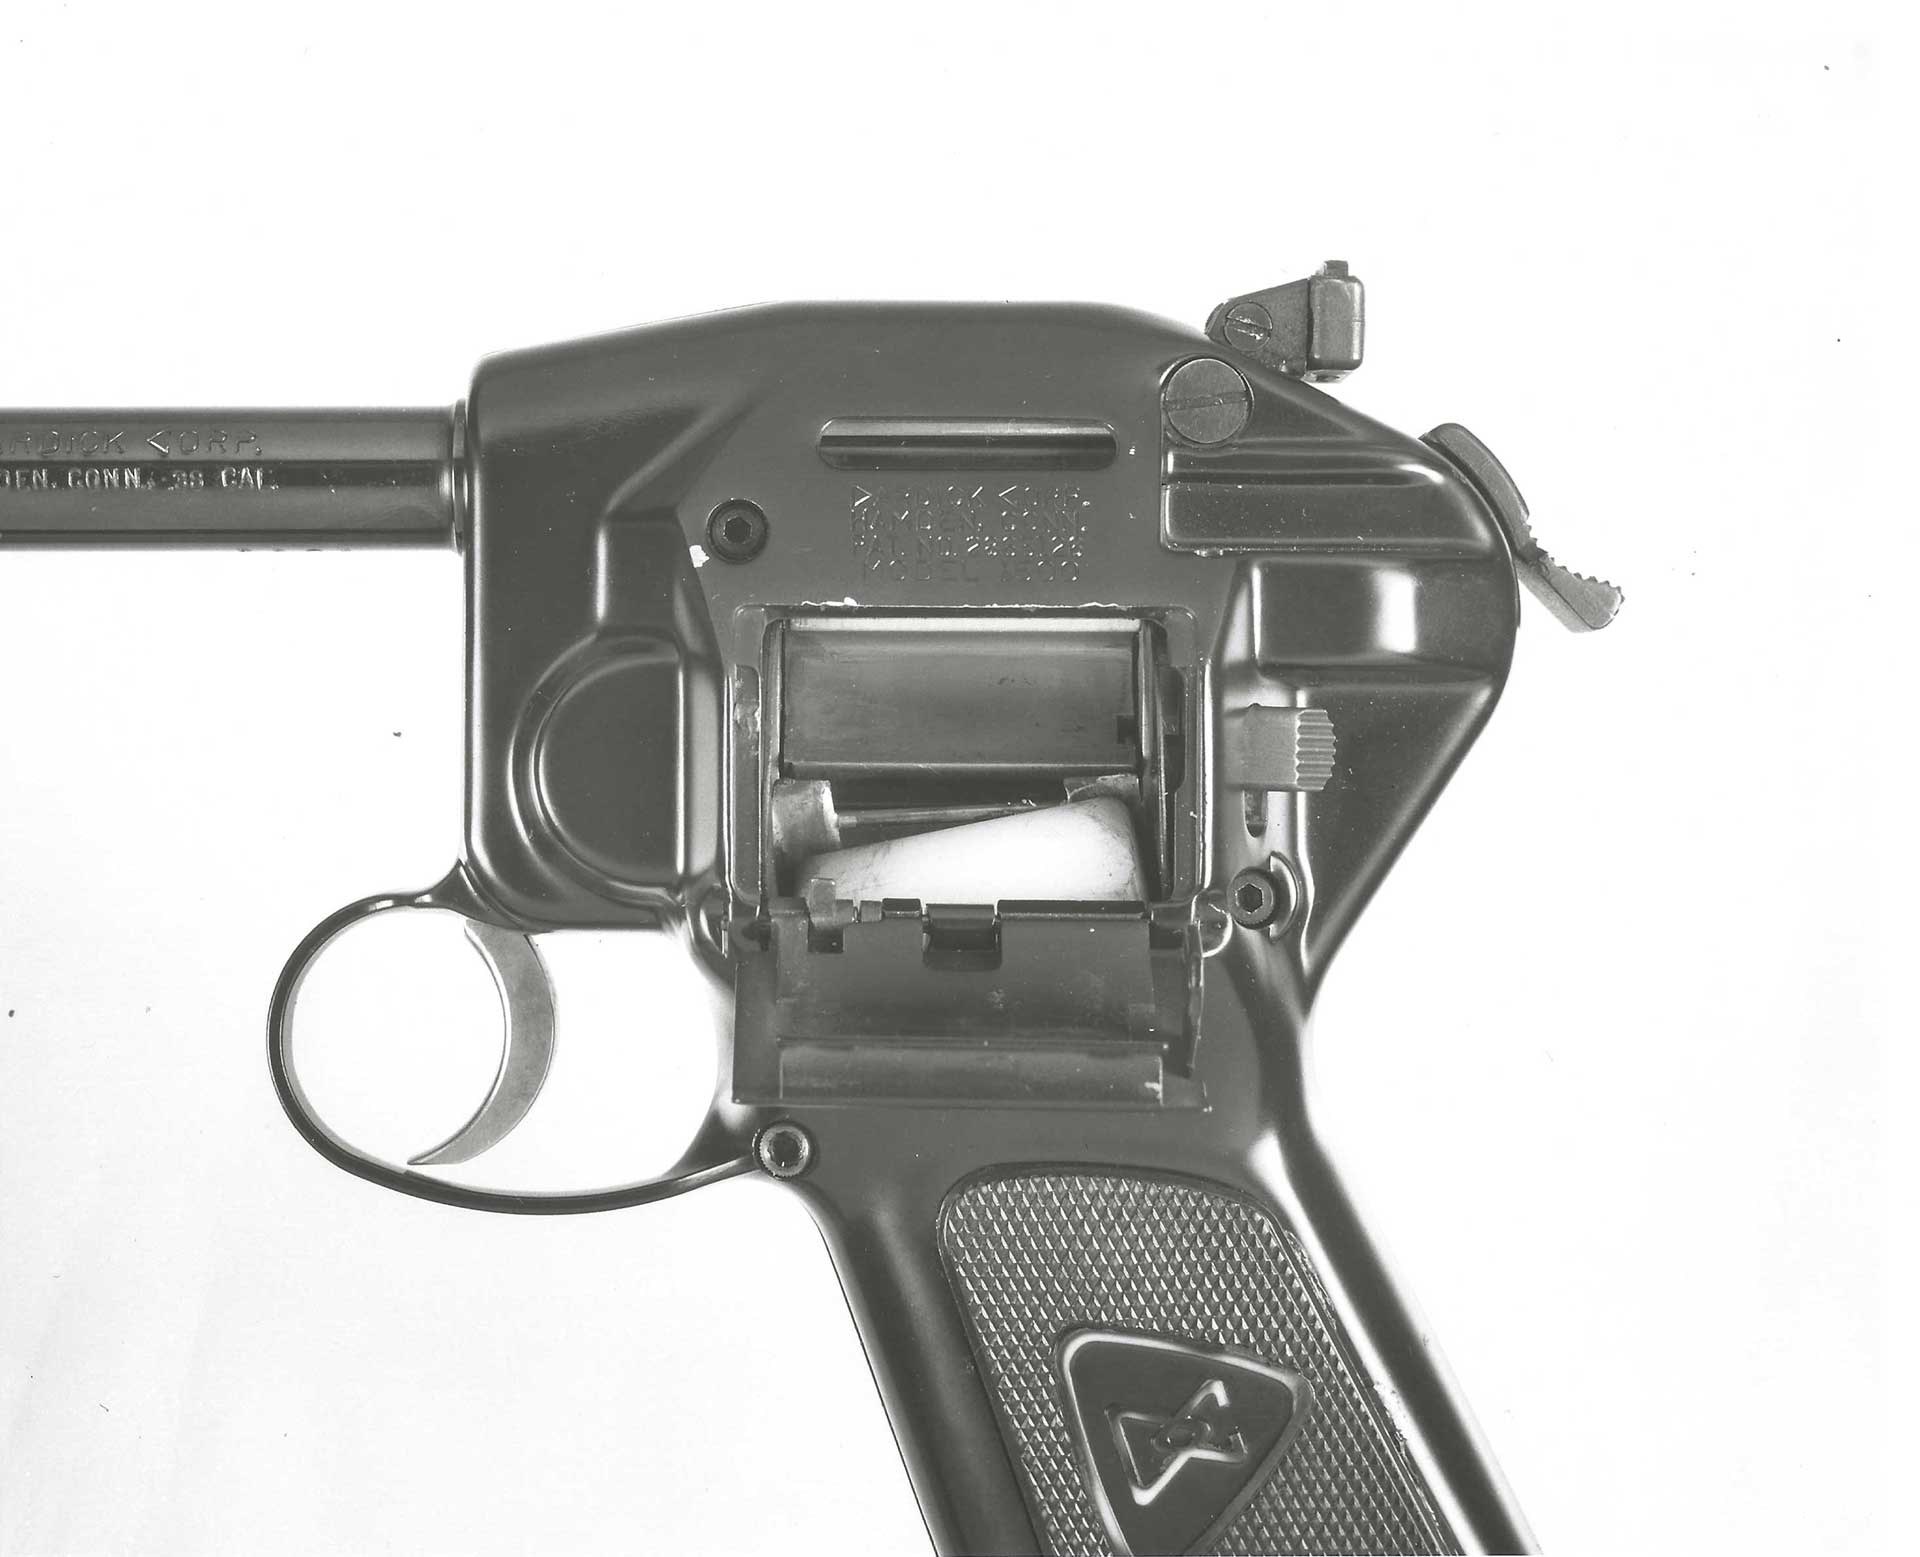 The left side of the Dardick pistol, showing the open-chamber on the side of the handgun.